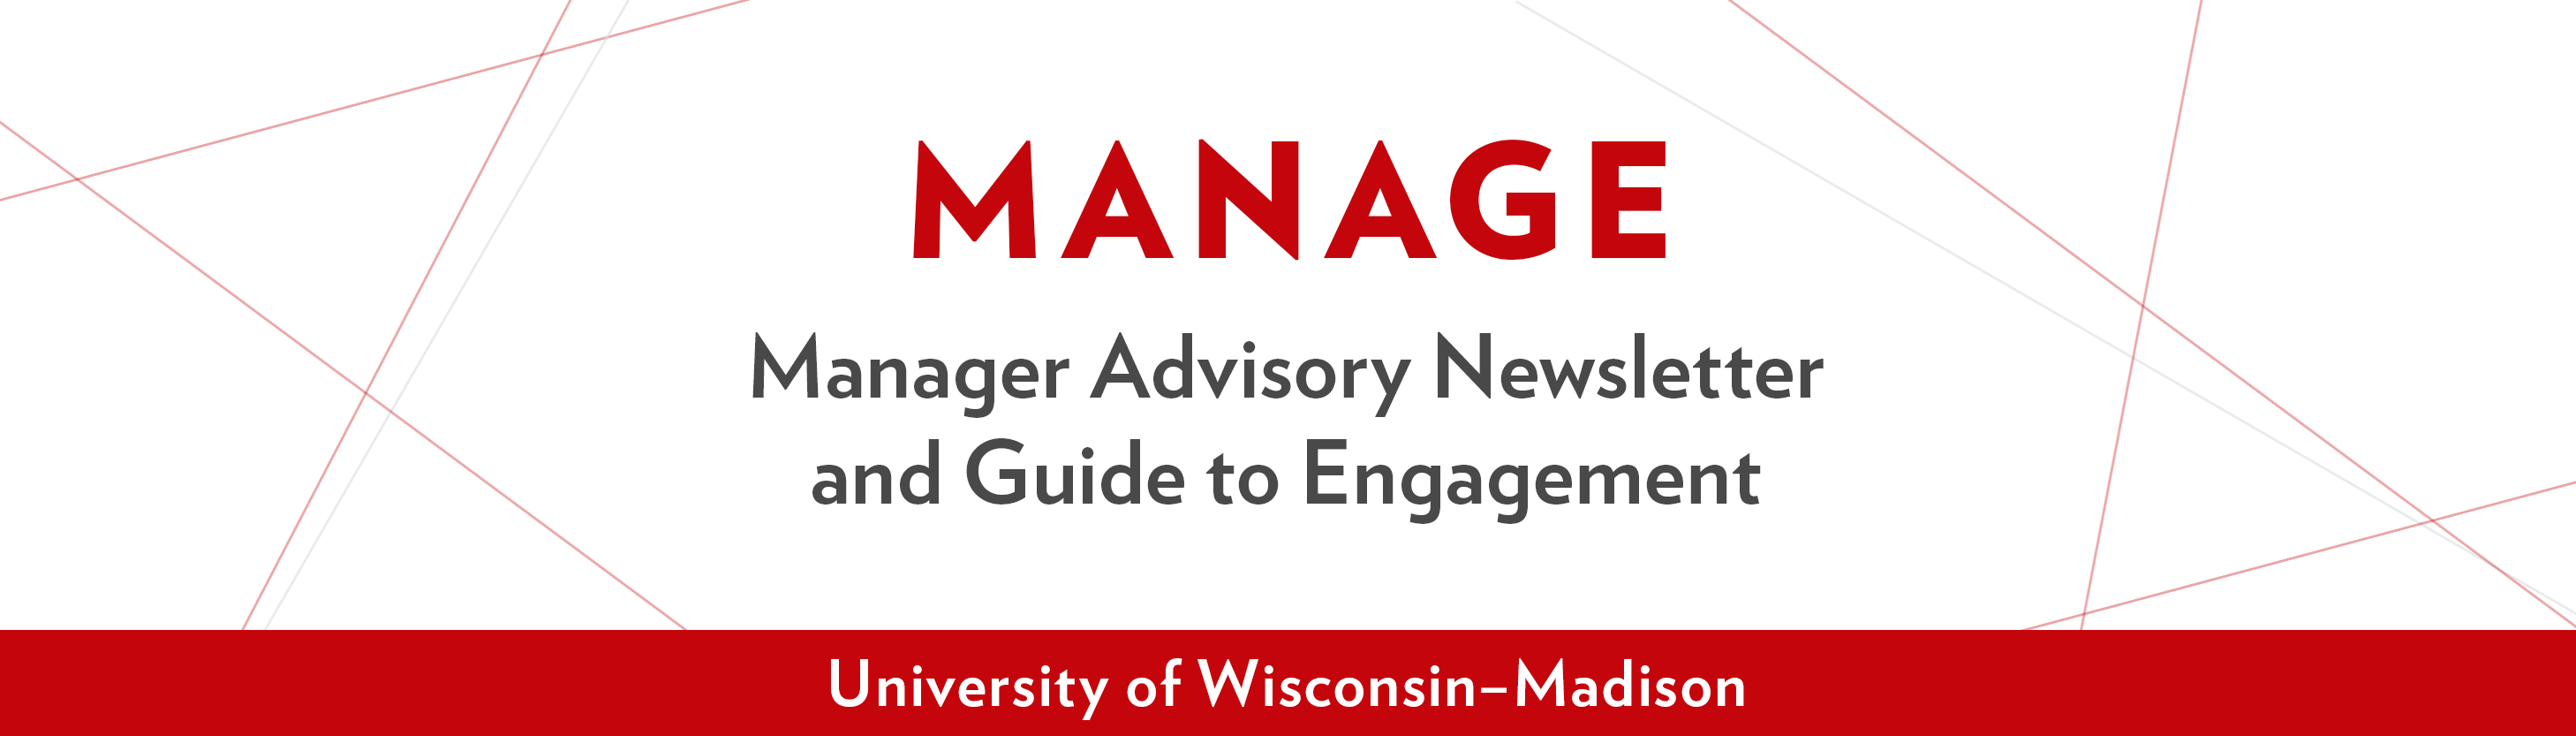 MANAGE: Manager Advisory Newsletter and Guide to Engagement